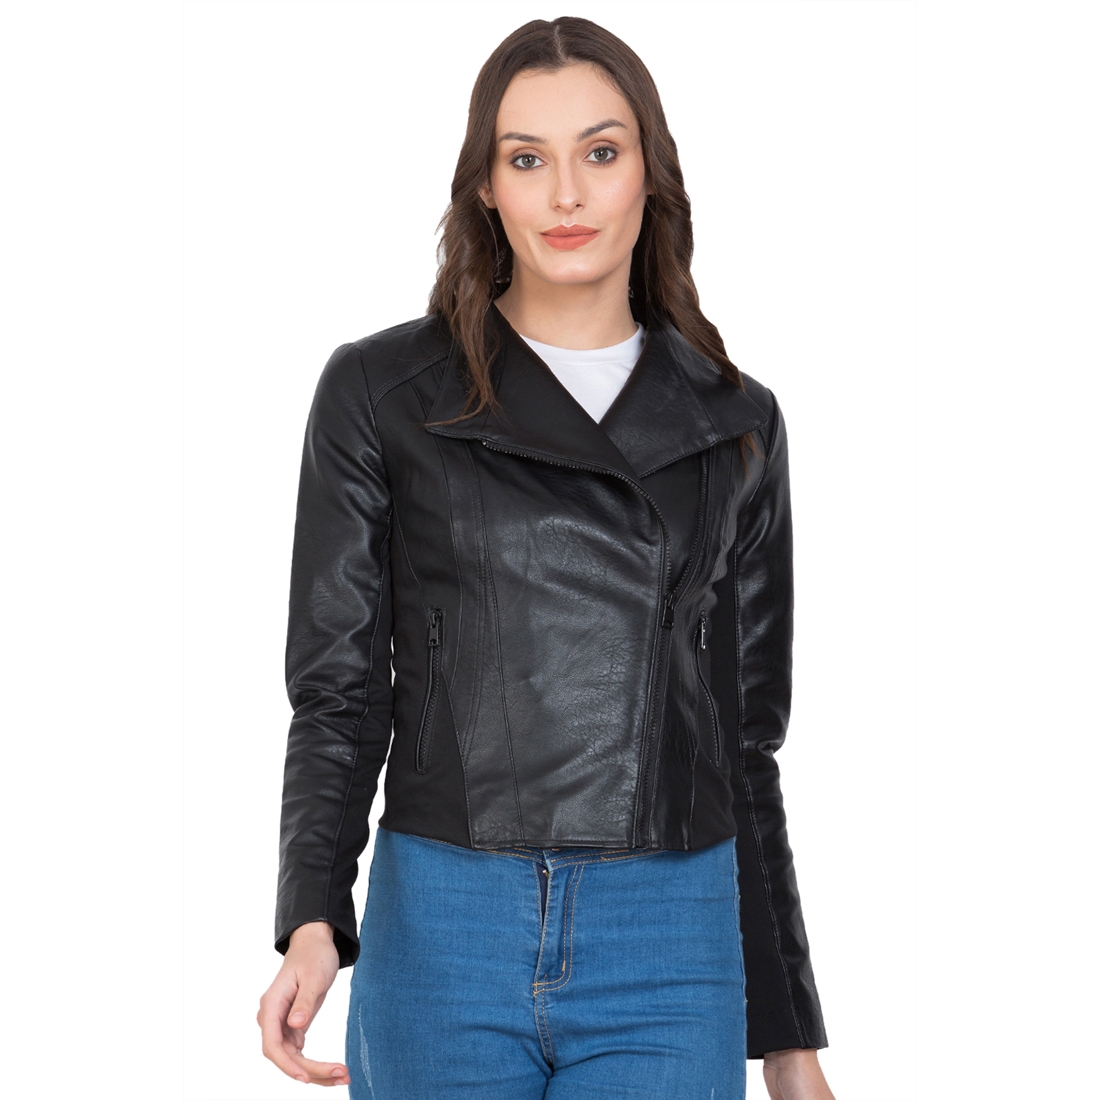 Justanned | JUSTANNED CARBON WOMEN LEATHER JACKET 0